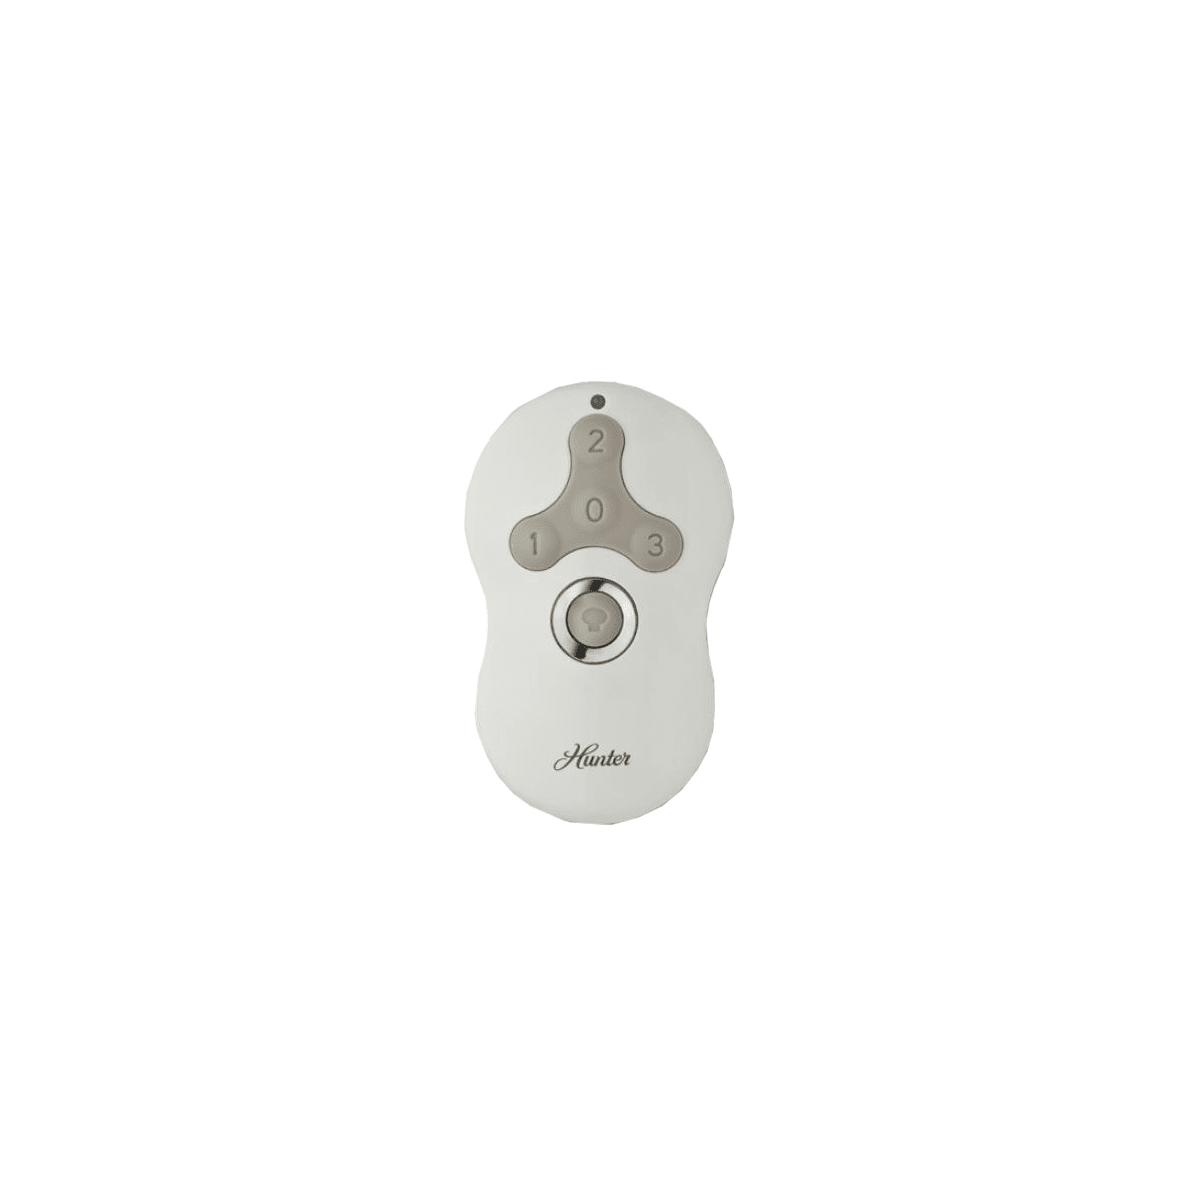 Hunter 99122 White Remote Control For 3 Speed Ceiling Fan And